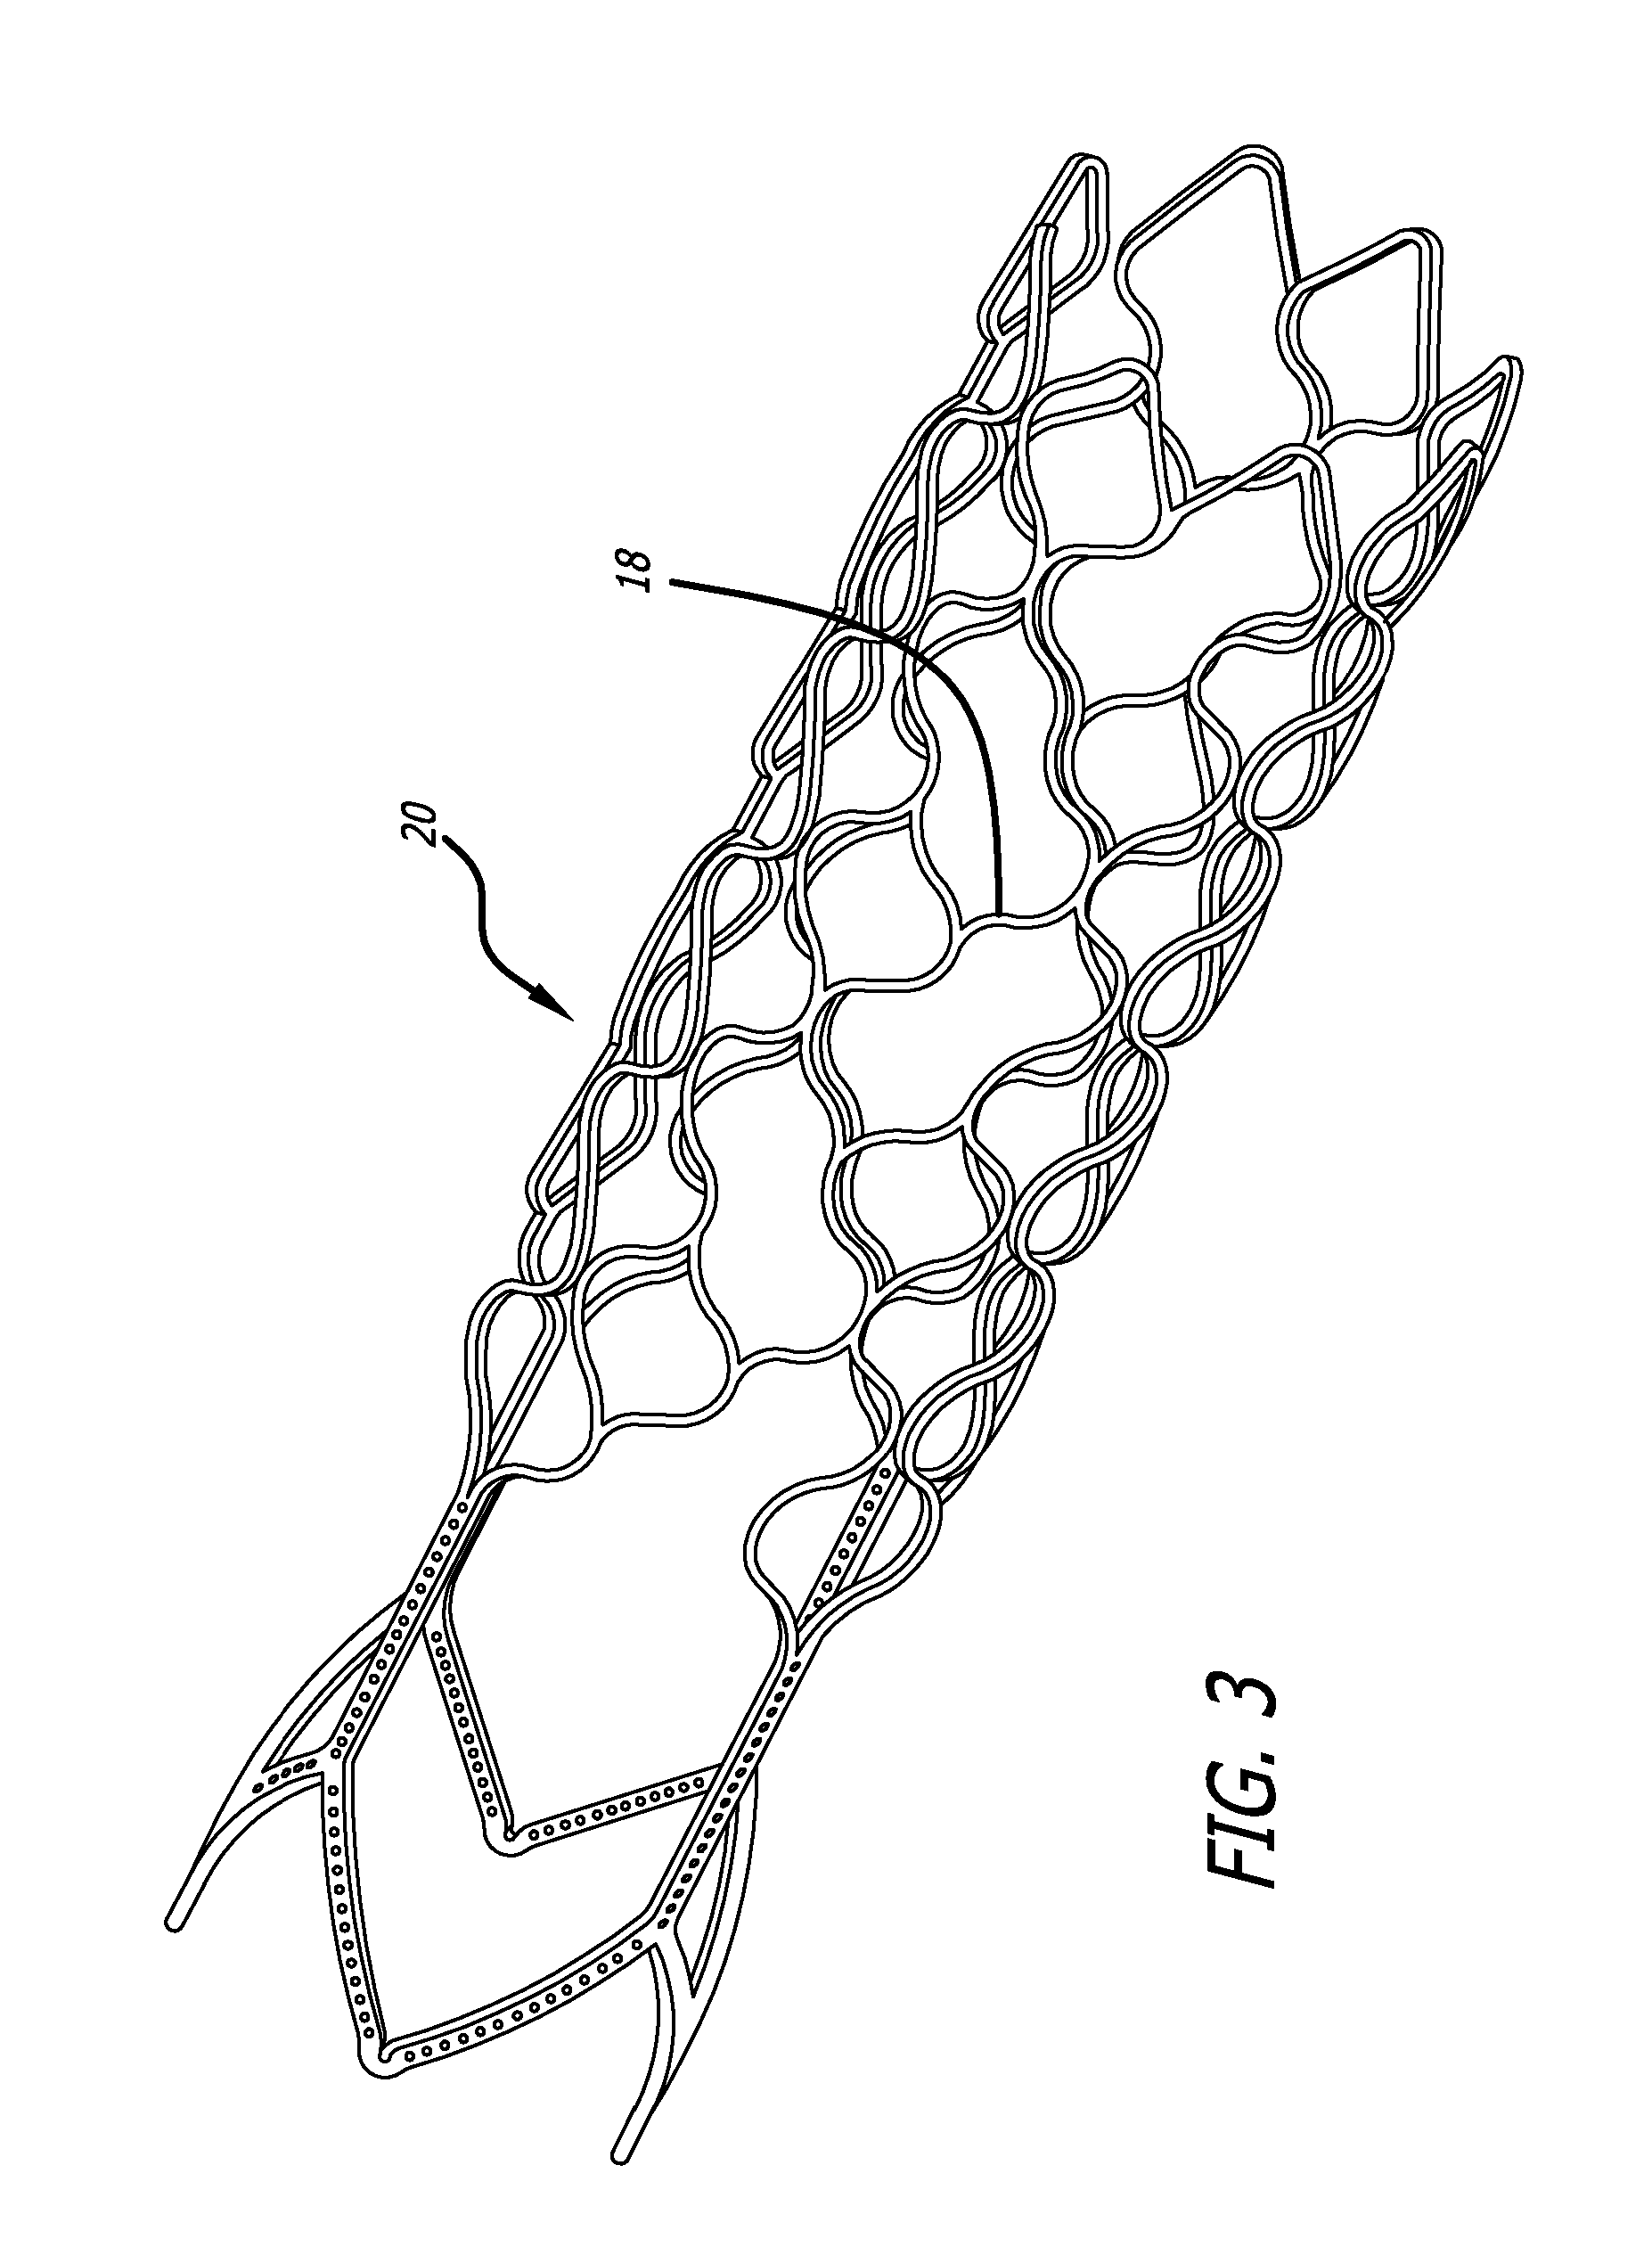 Methods and devices for treatment of vascular defects